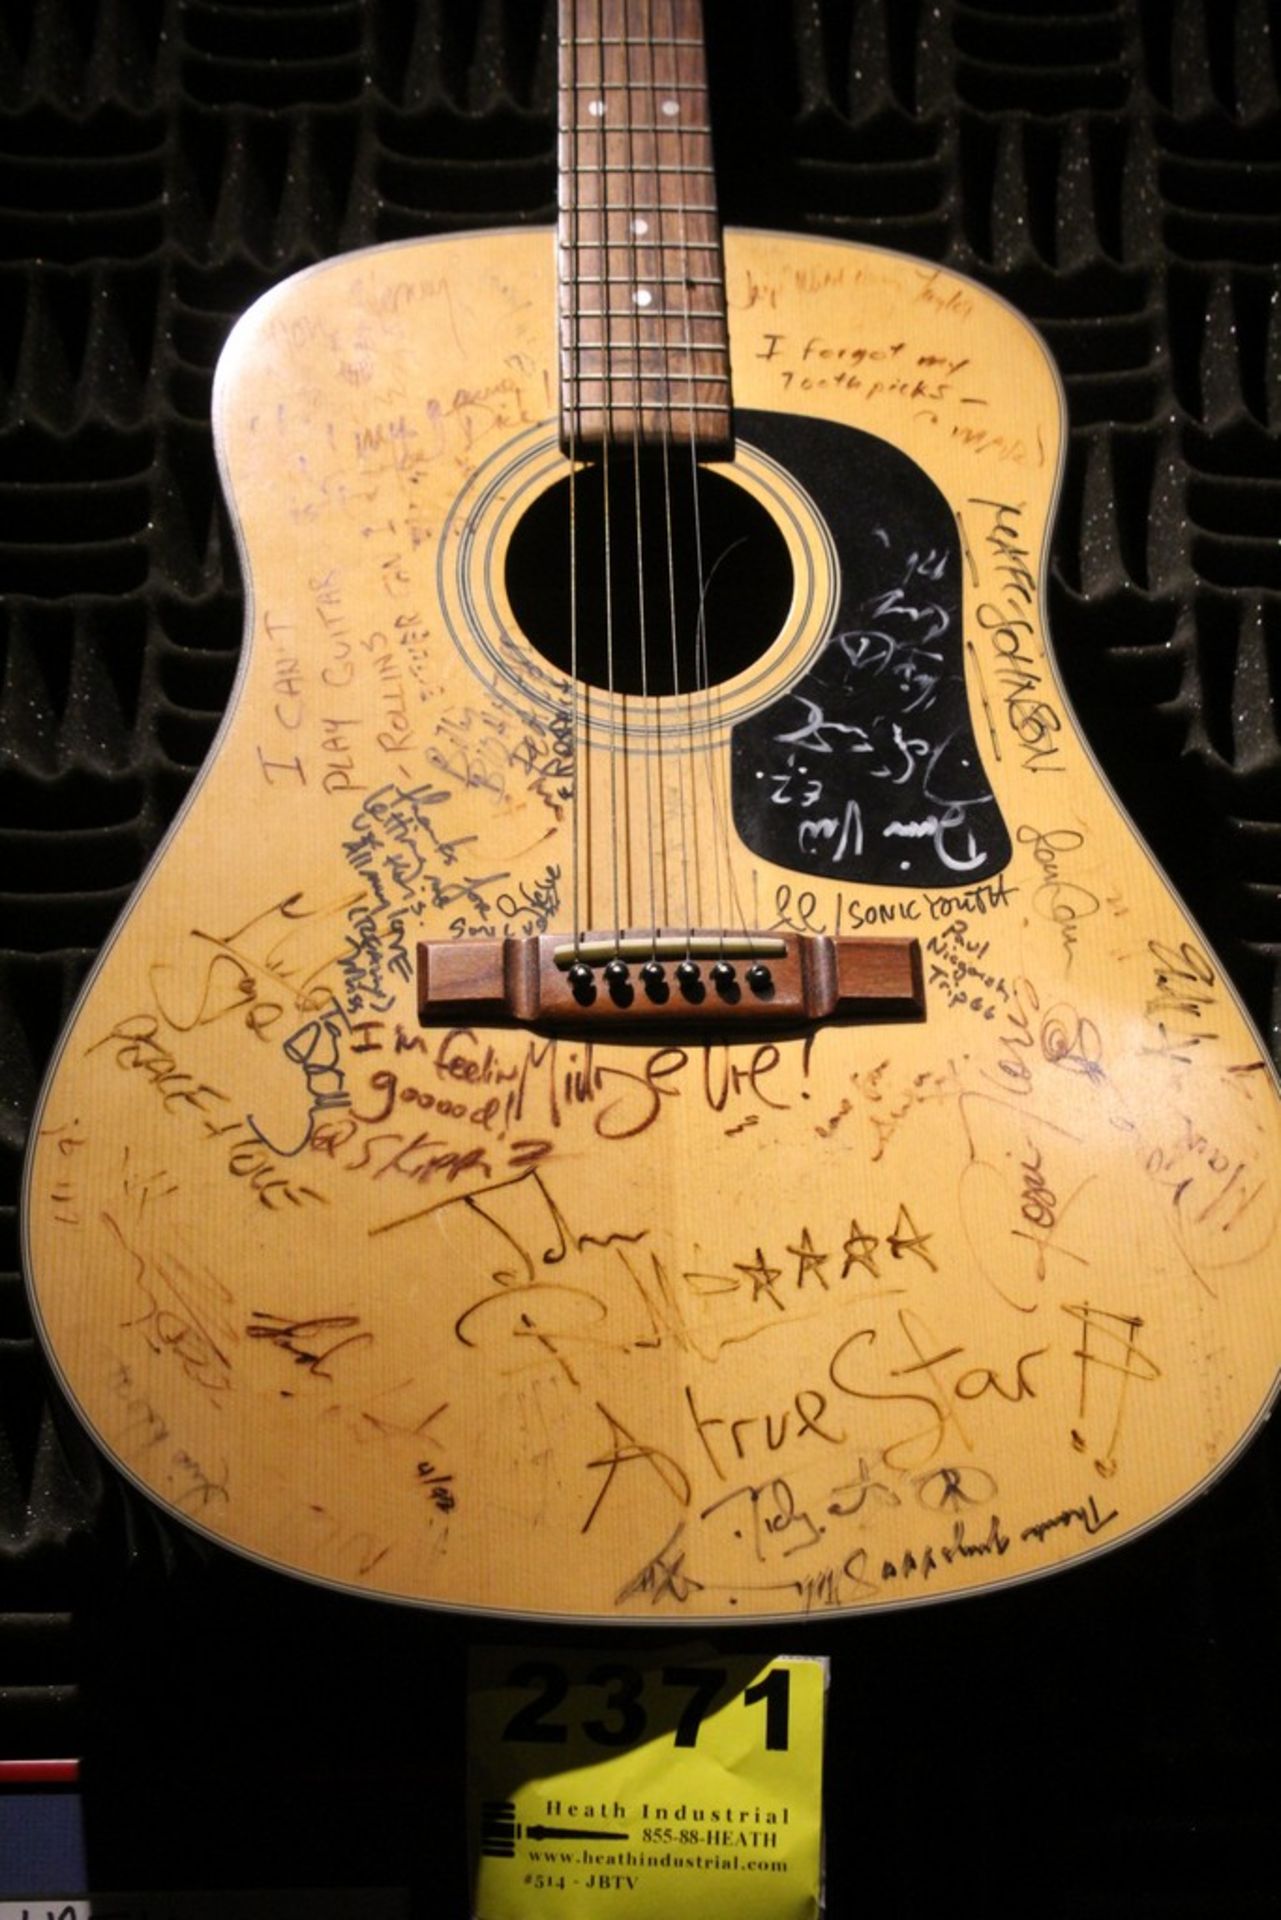 Signed Acoustic Guitar- Henry Rollins, Members of Sonic Youth, Members of Thin Lizzy - Image 3 of 3